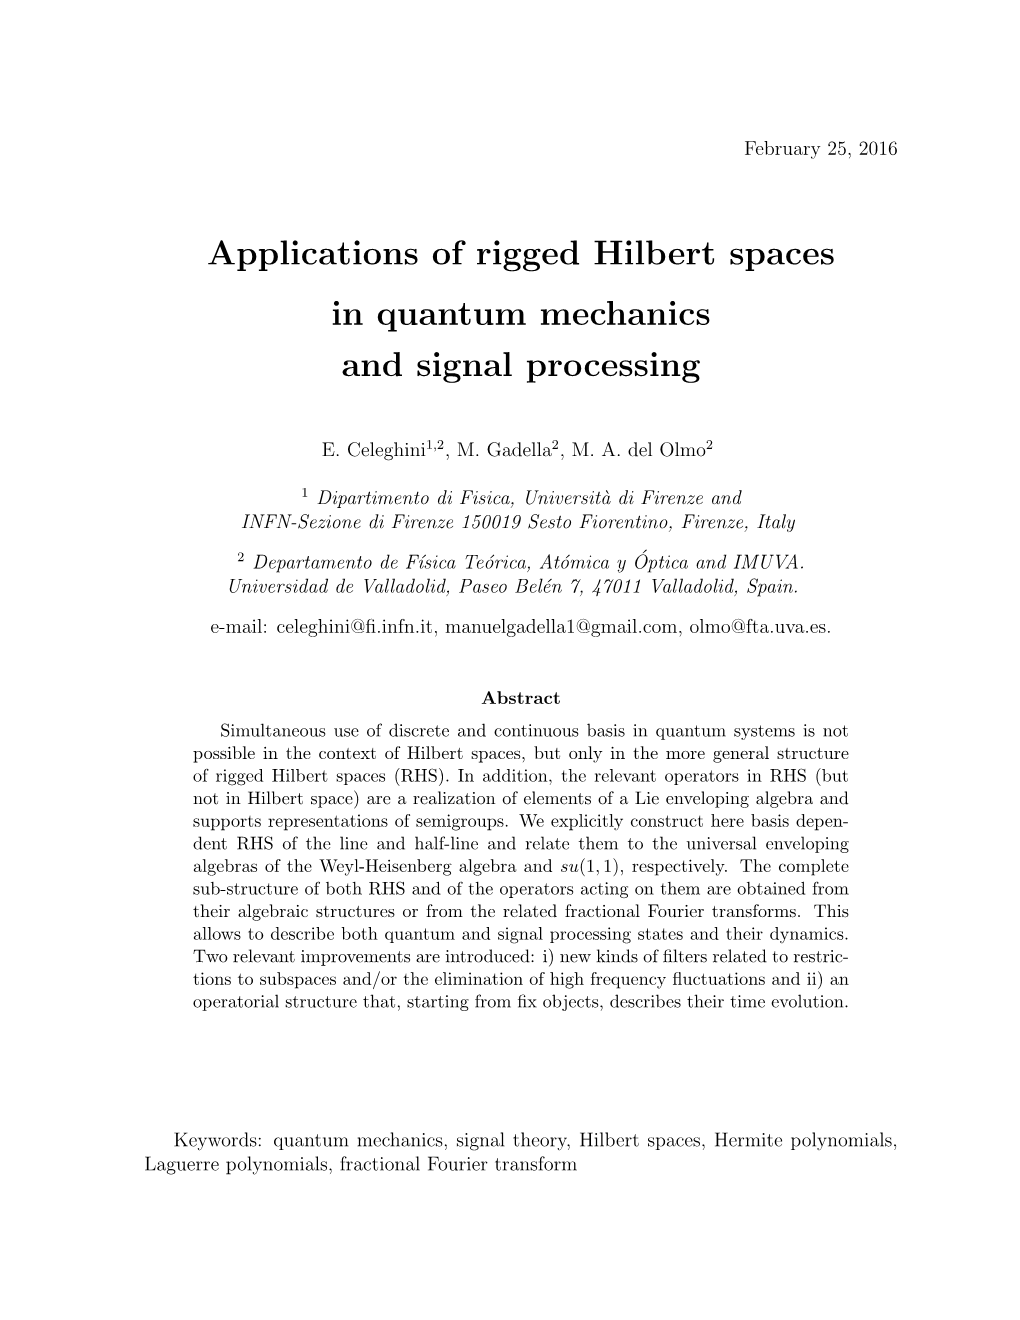 Applications of Rigged Hilbert Spaces in Quantum Mechanics and Signal Processing